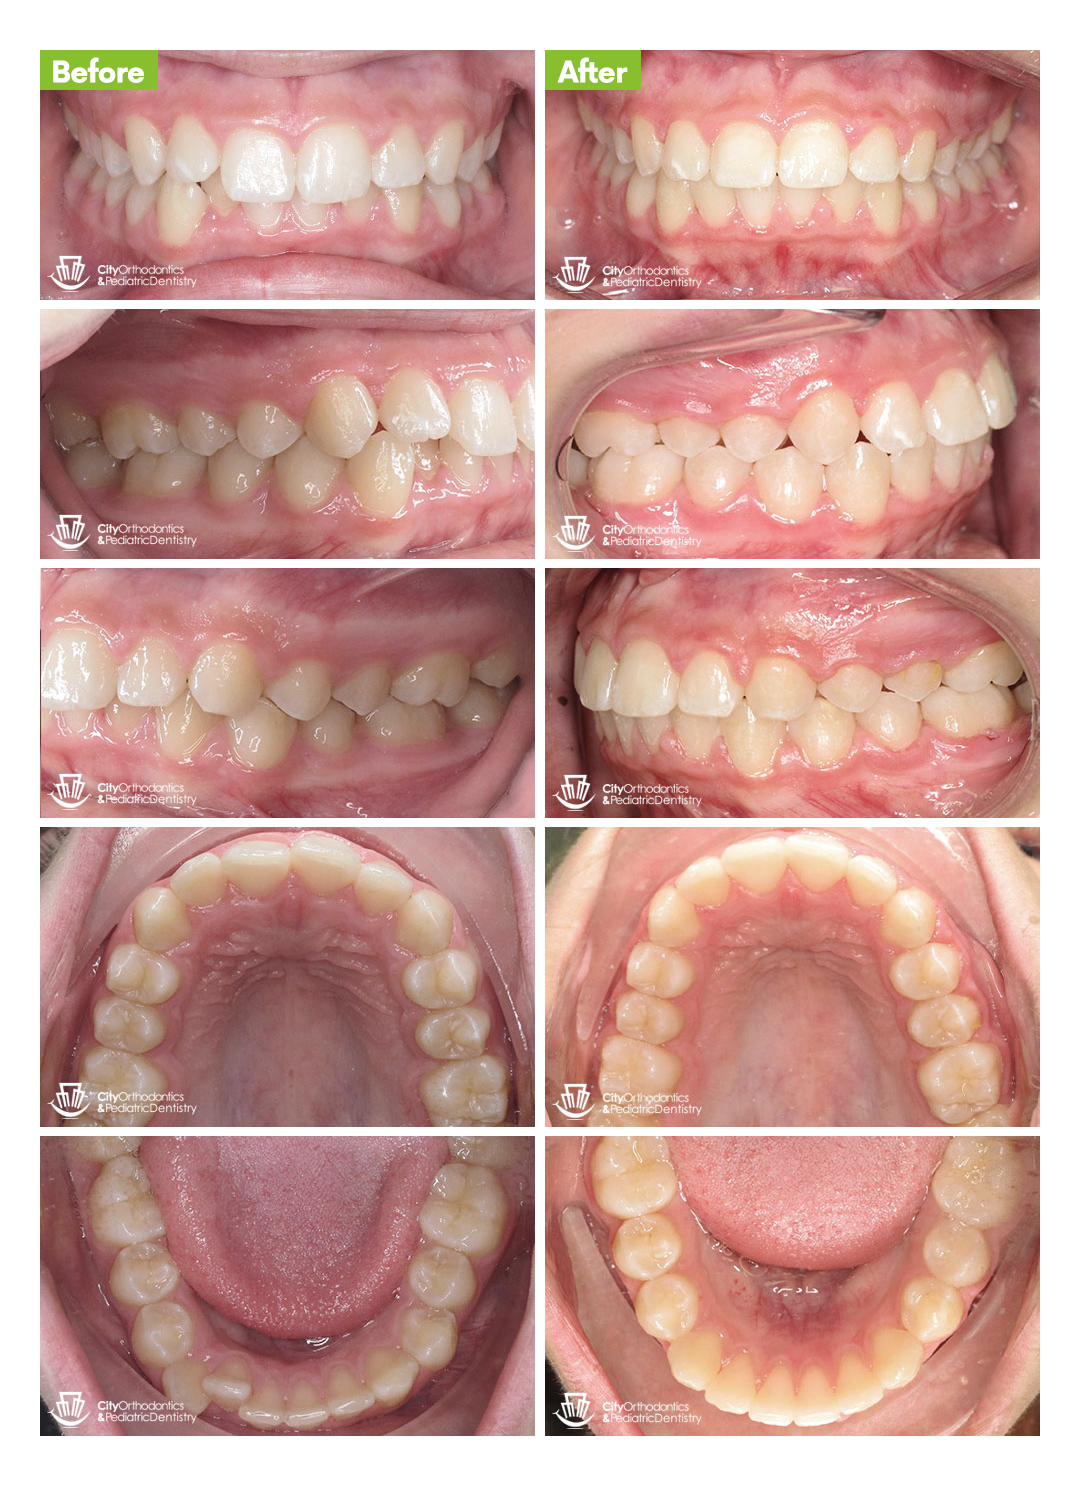 City Orthodontics & Pediatric Dentistry|Overbite (4) - Before and After